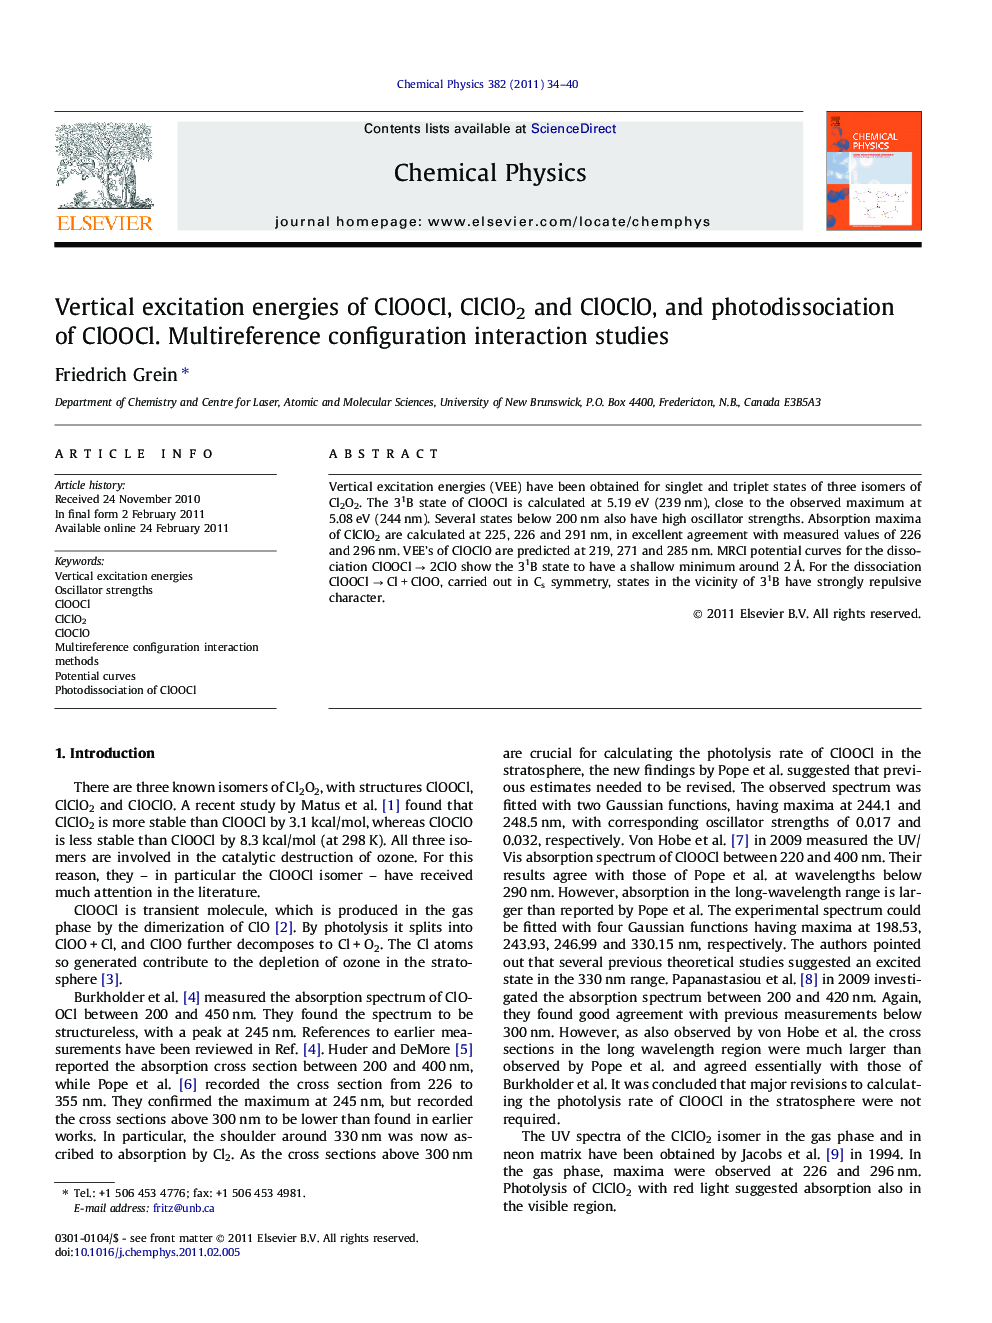 Vertical excitation energies of ClOOCl, ClClO2 and ClOClO, and photodissociation of ClOOCl. Multireference configuration interaction studies